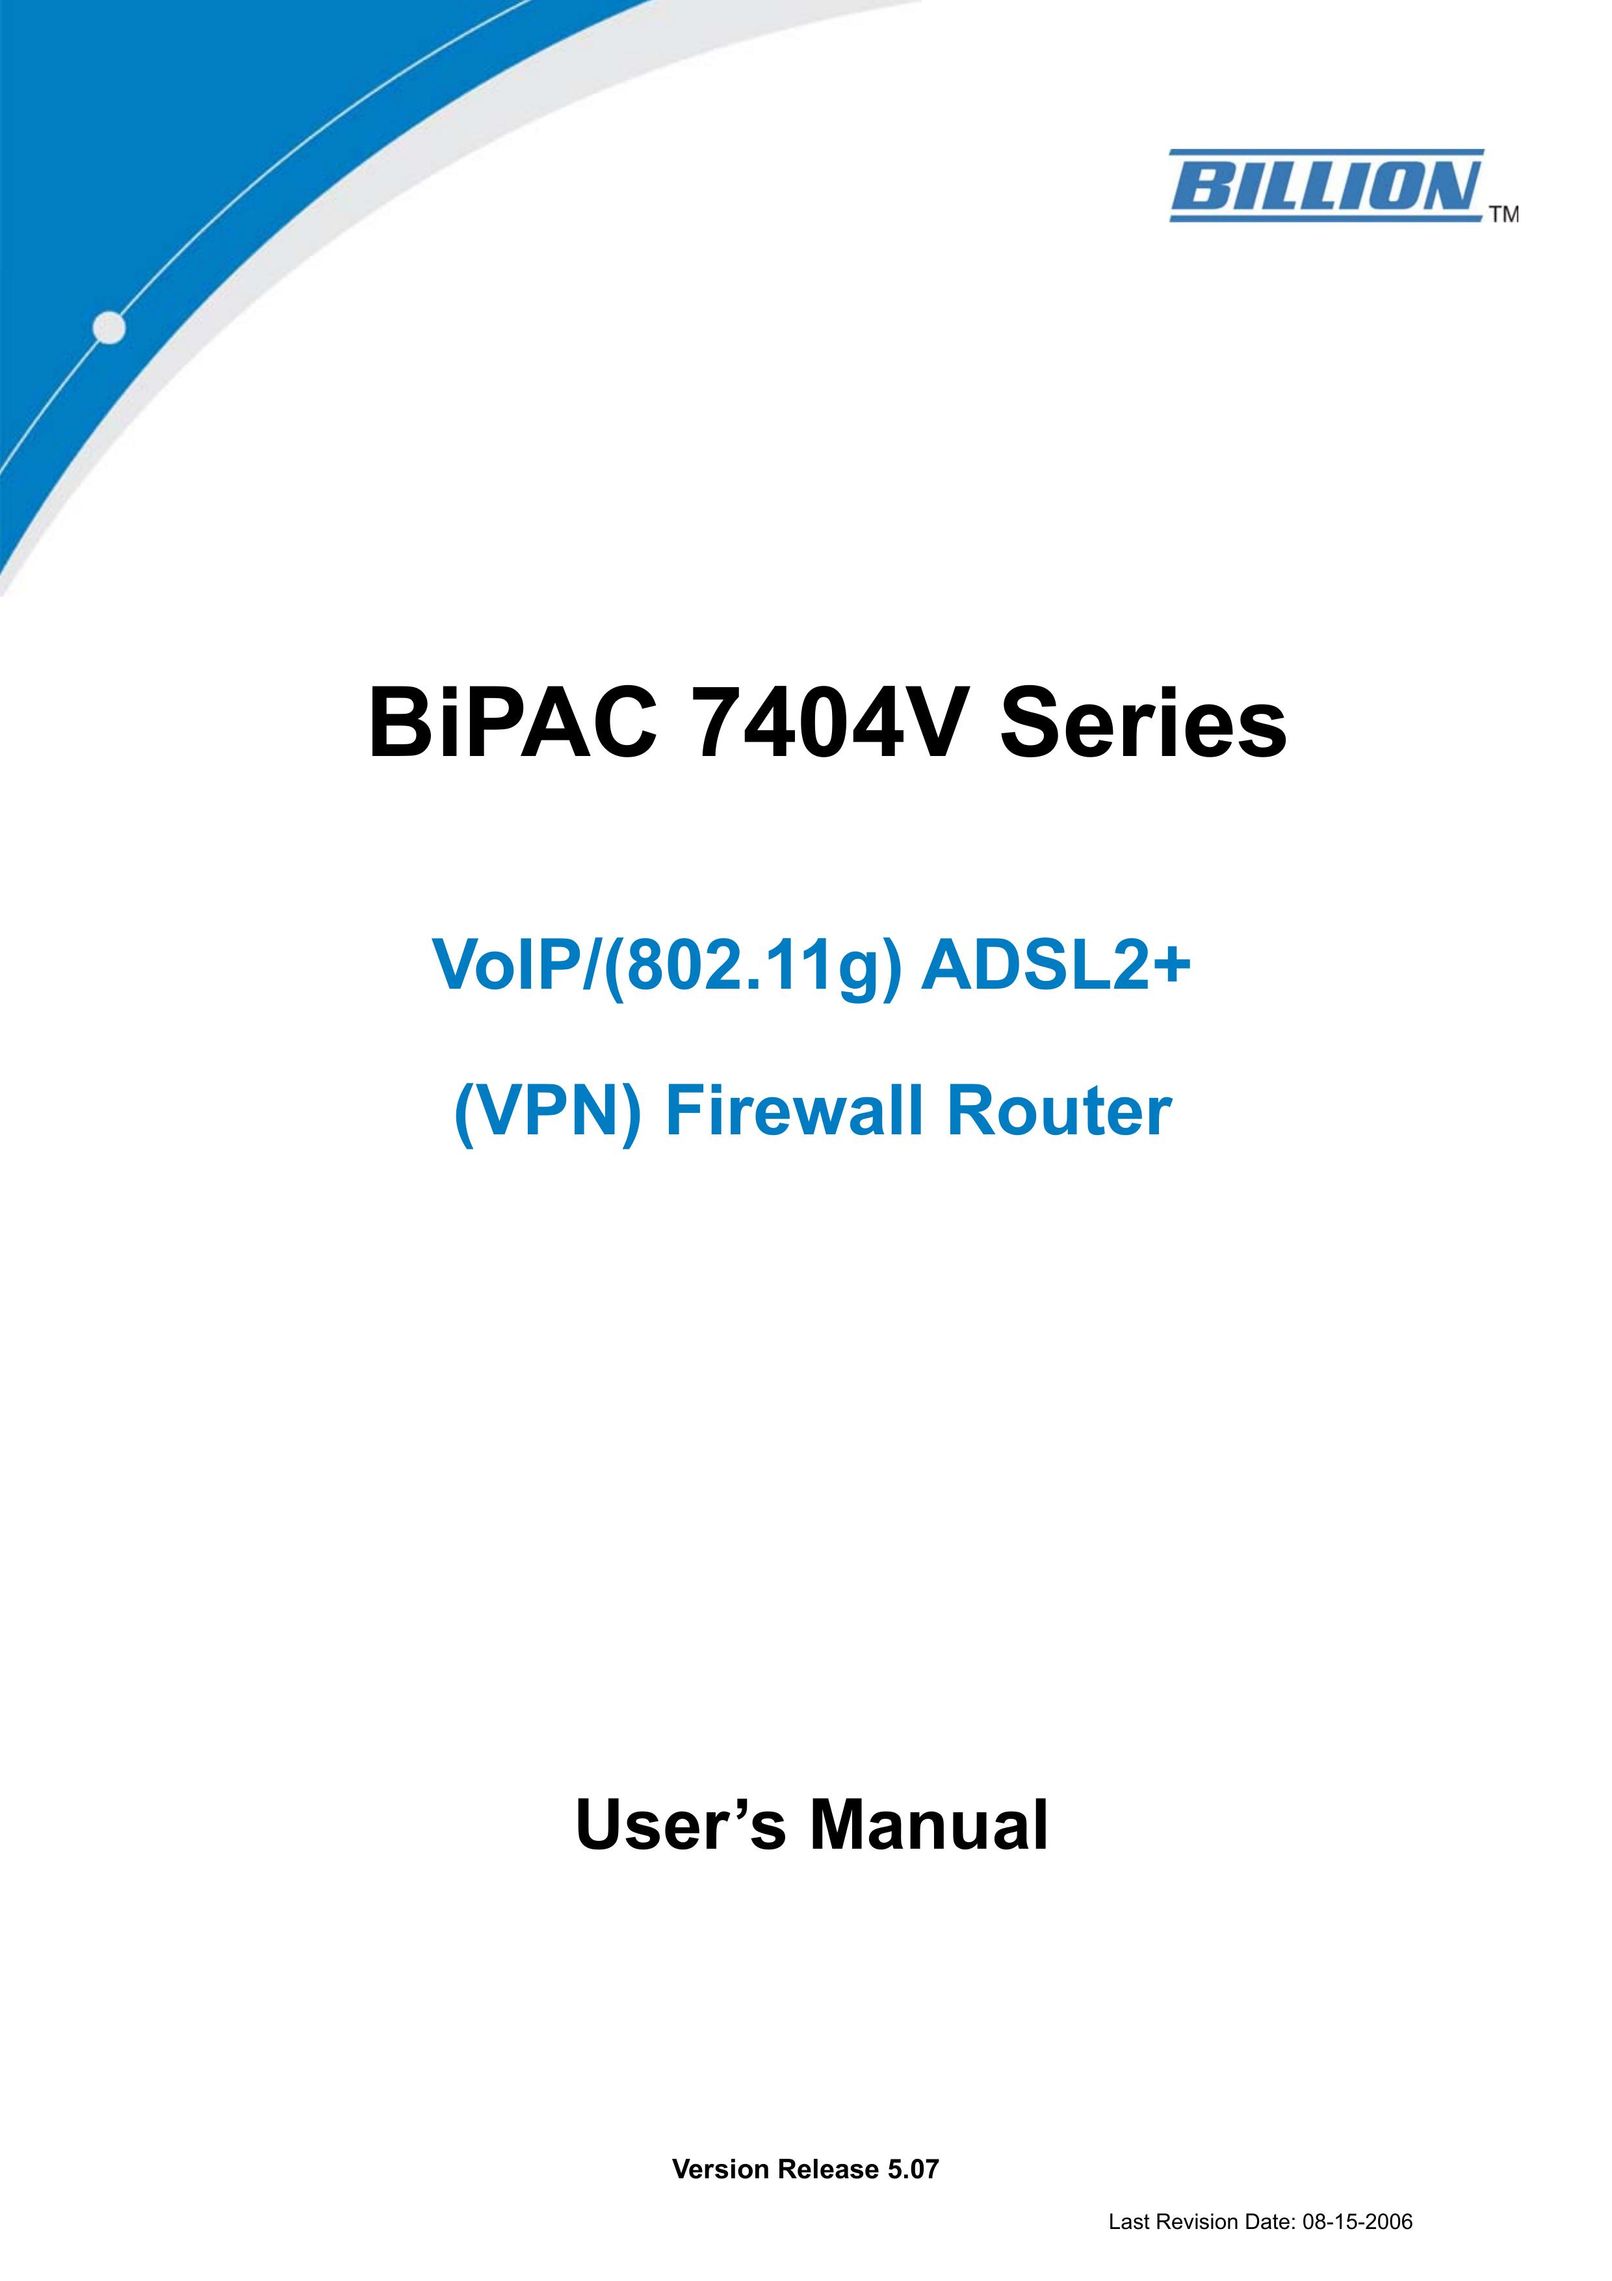 Billion Electric Company 7404V Series Network Router User Manual